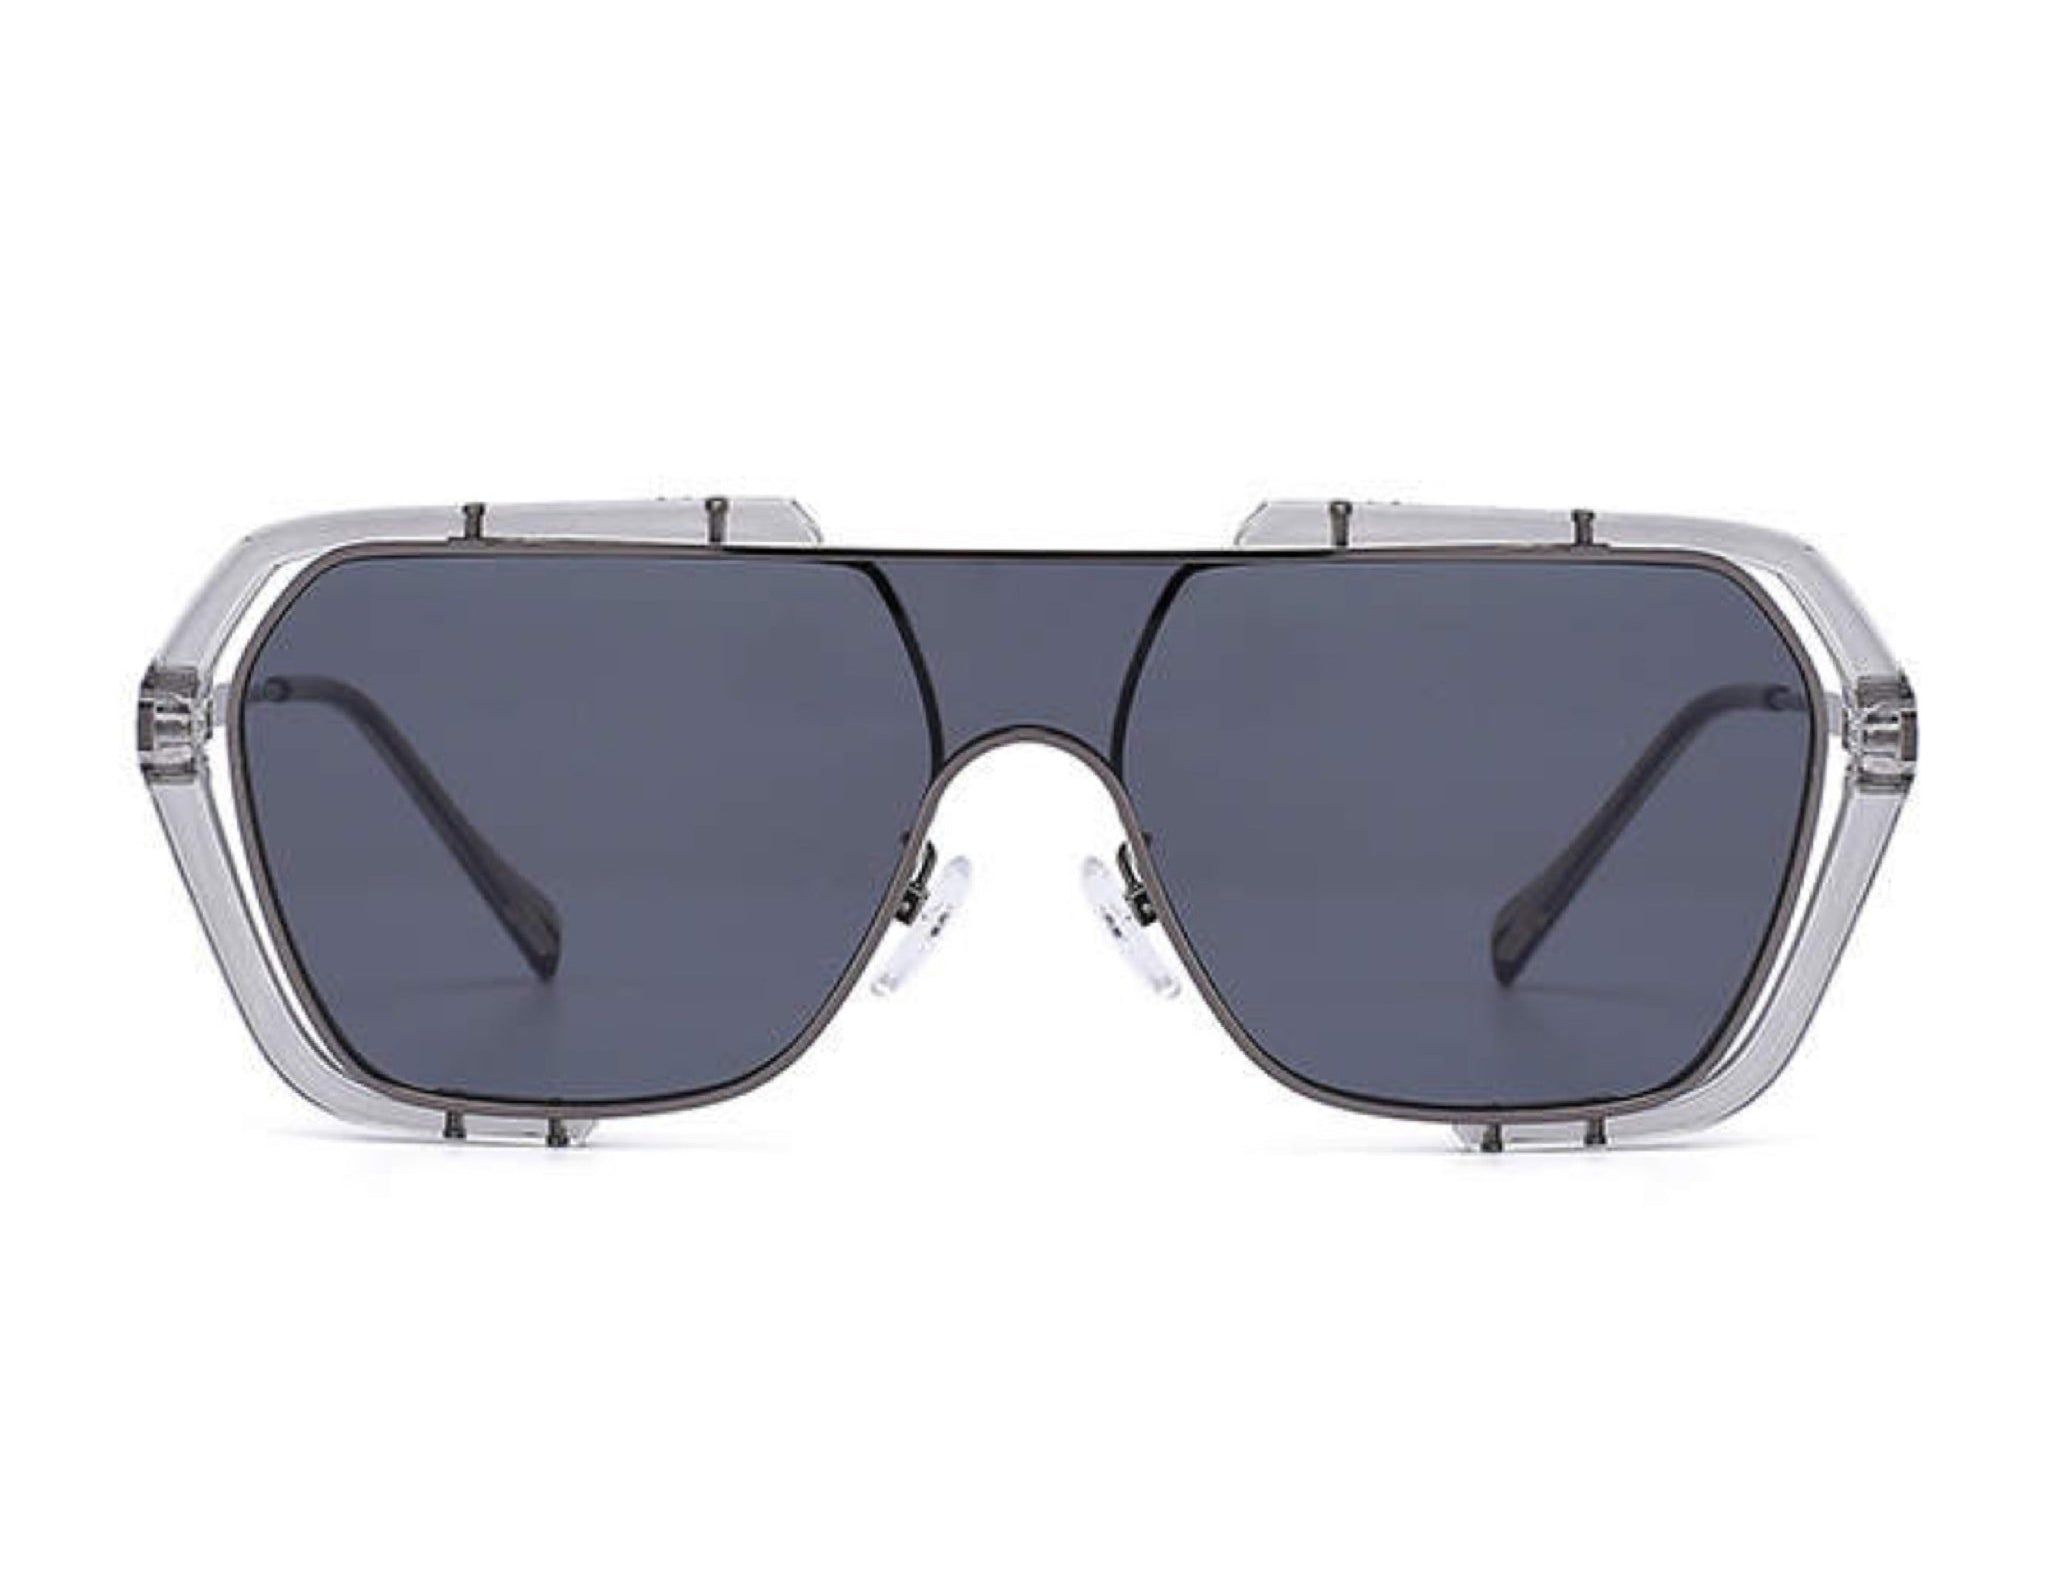 Vray - Unisex Sunglasses (PRE-ORDER DISPATCH DATE 14 JULY 2023) - Sarman Fashion - Wholesale Clothing Fashion Brand for Men from Canada